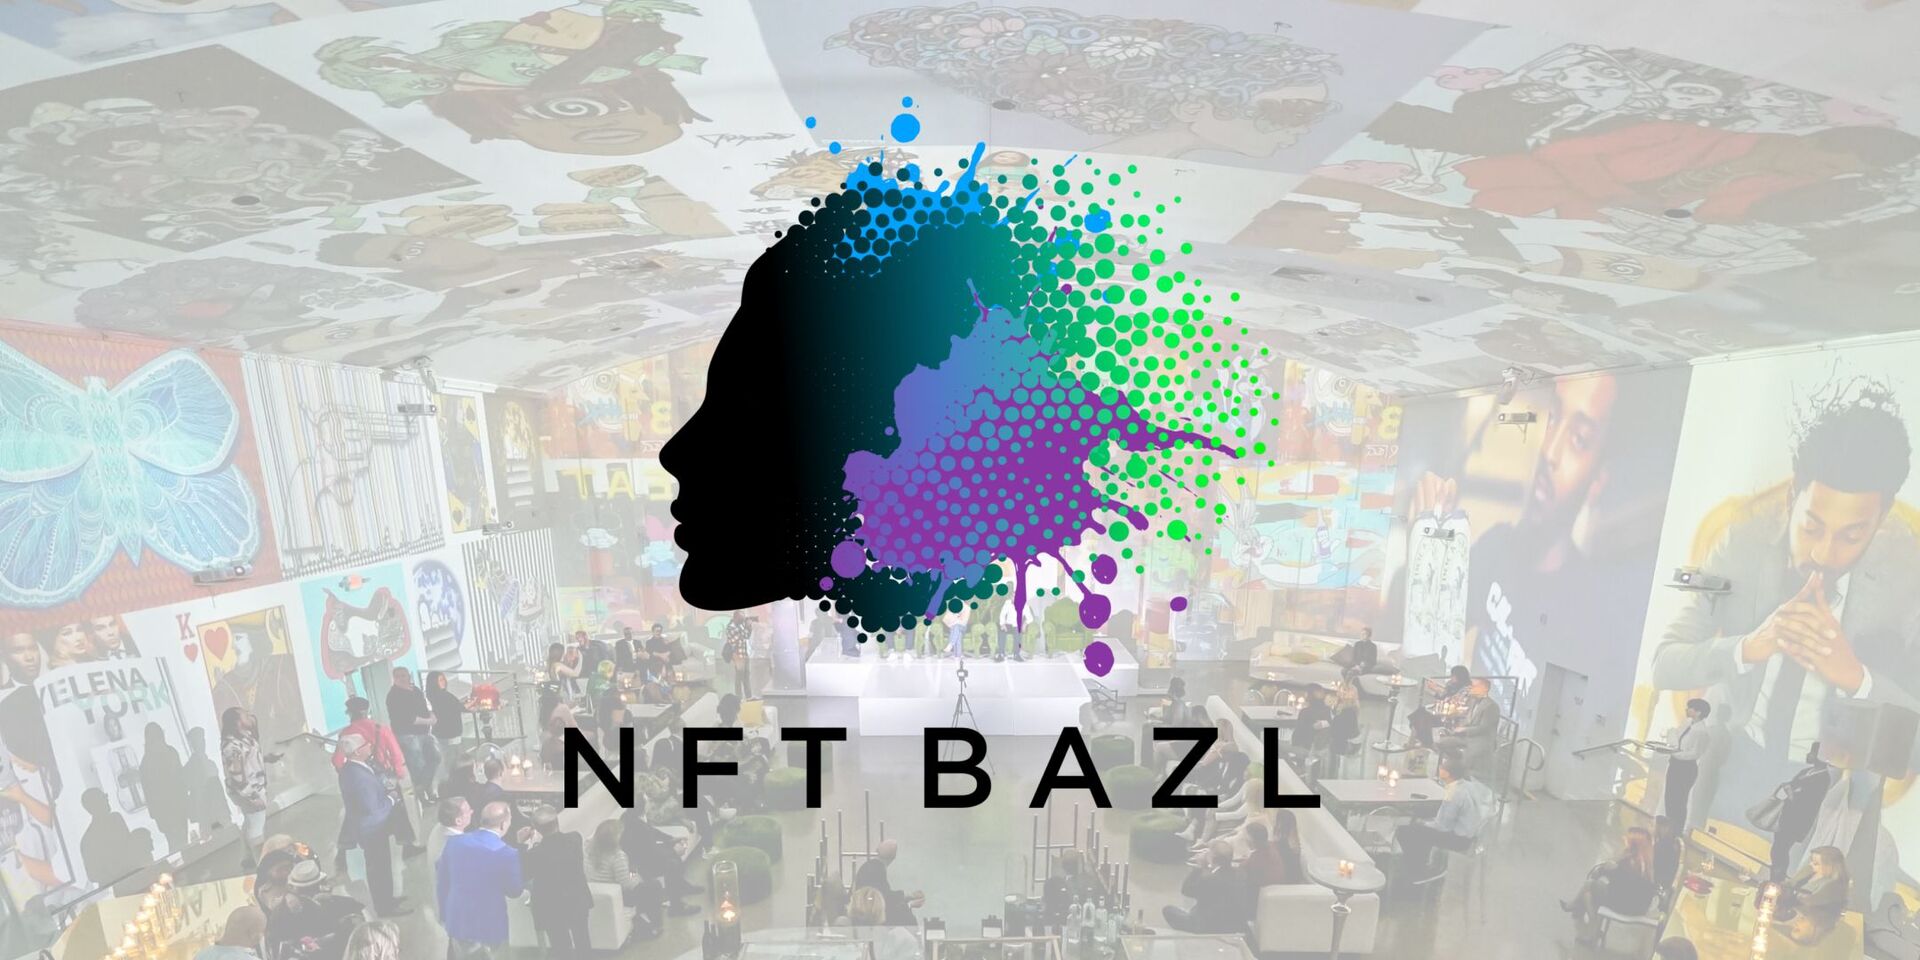 NFT BAZL Boosts Emerging NFT Industry by Auctioning 100+ Physical and